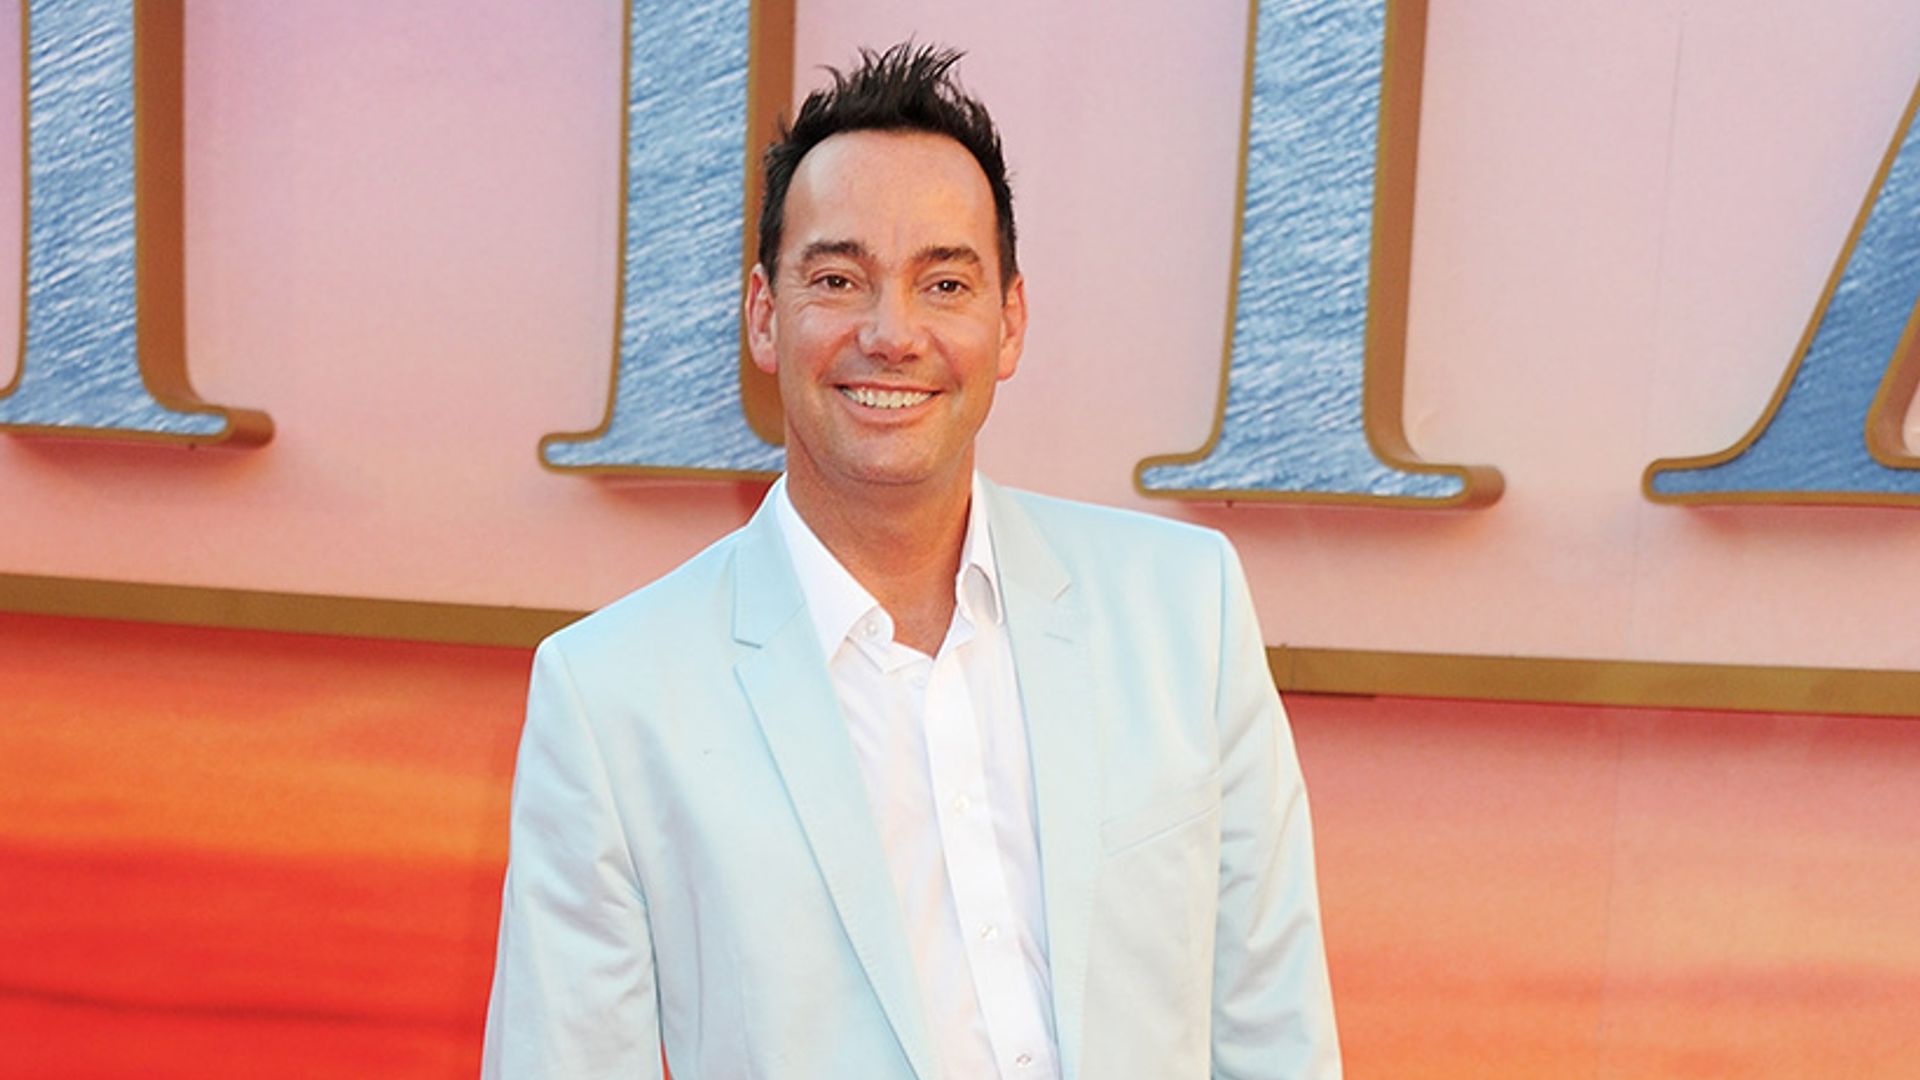 Strictly Come Dancing judge Craig Revel Horwood reveals he has been homeless for five months